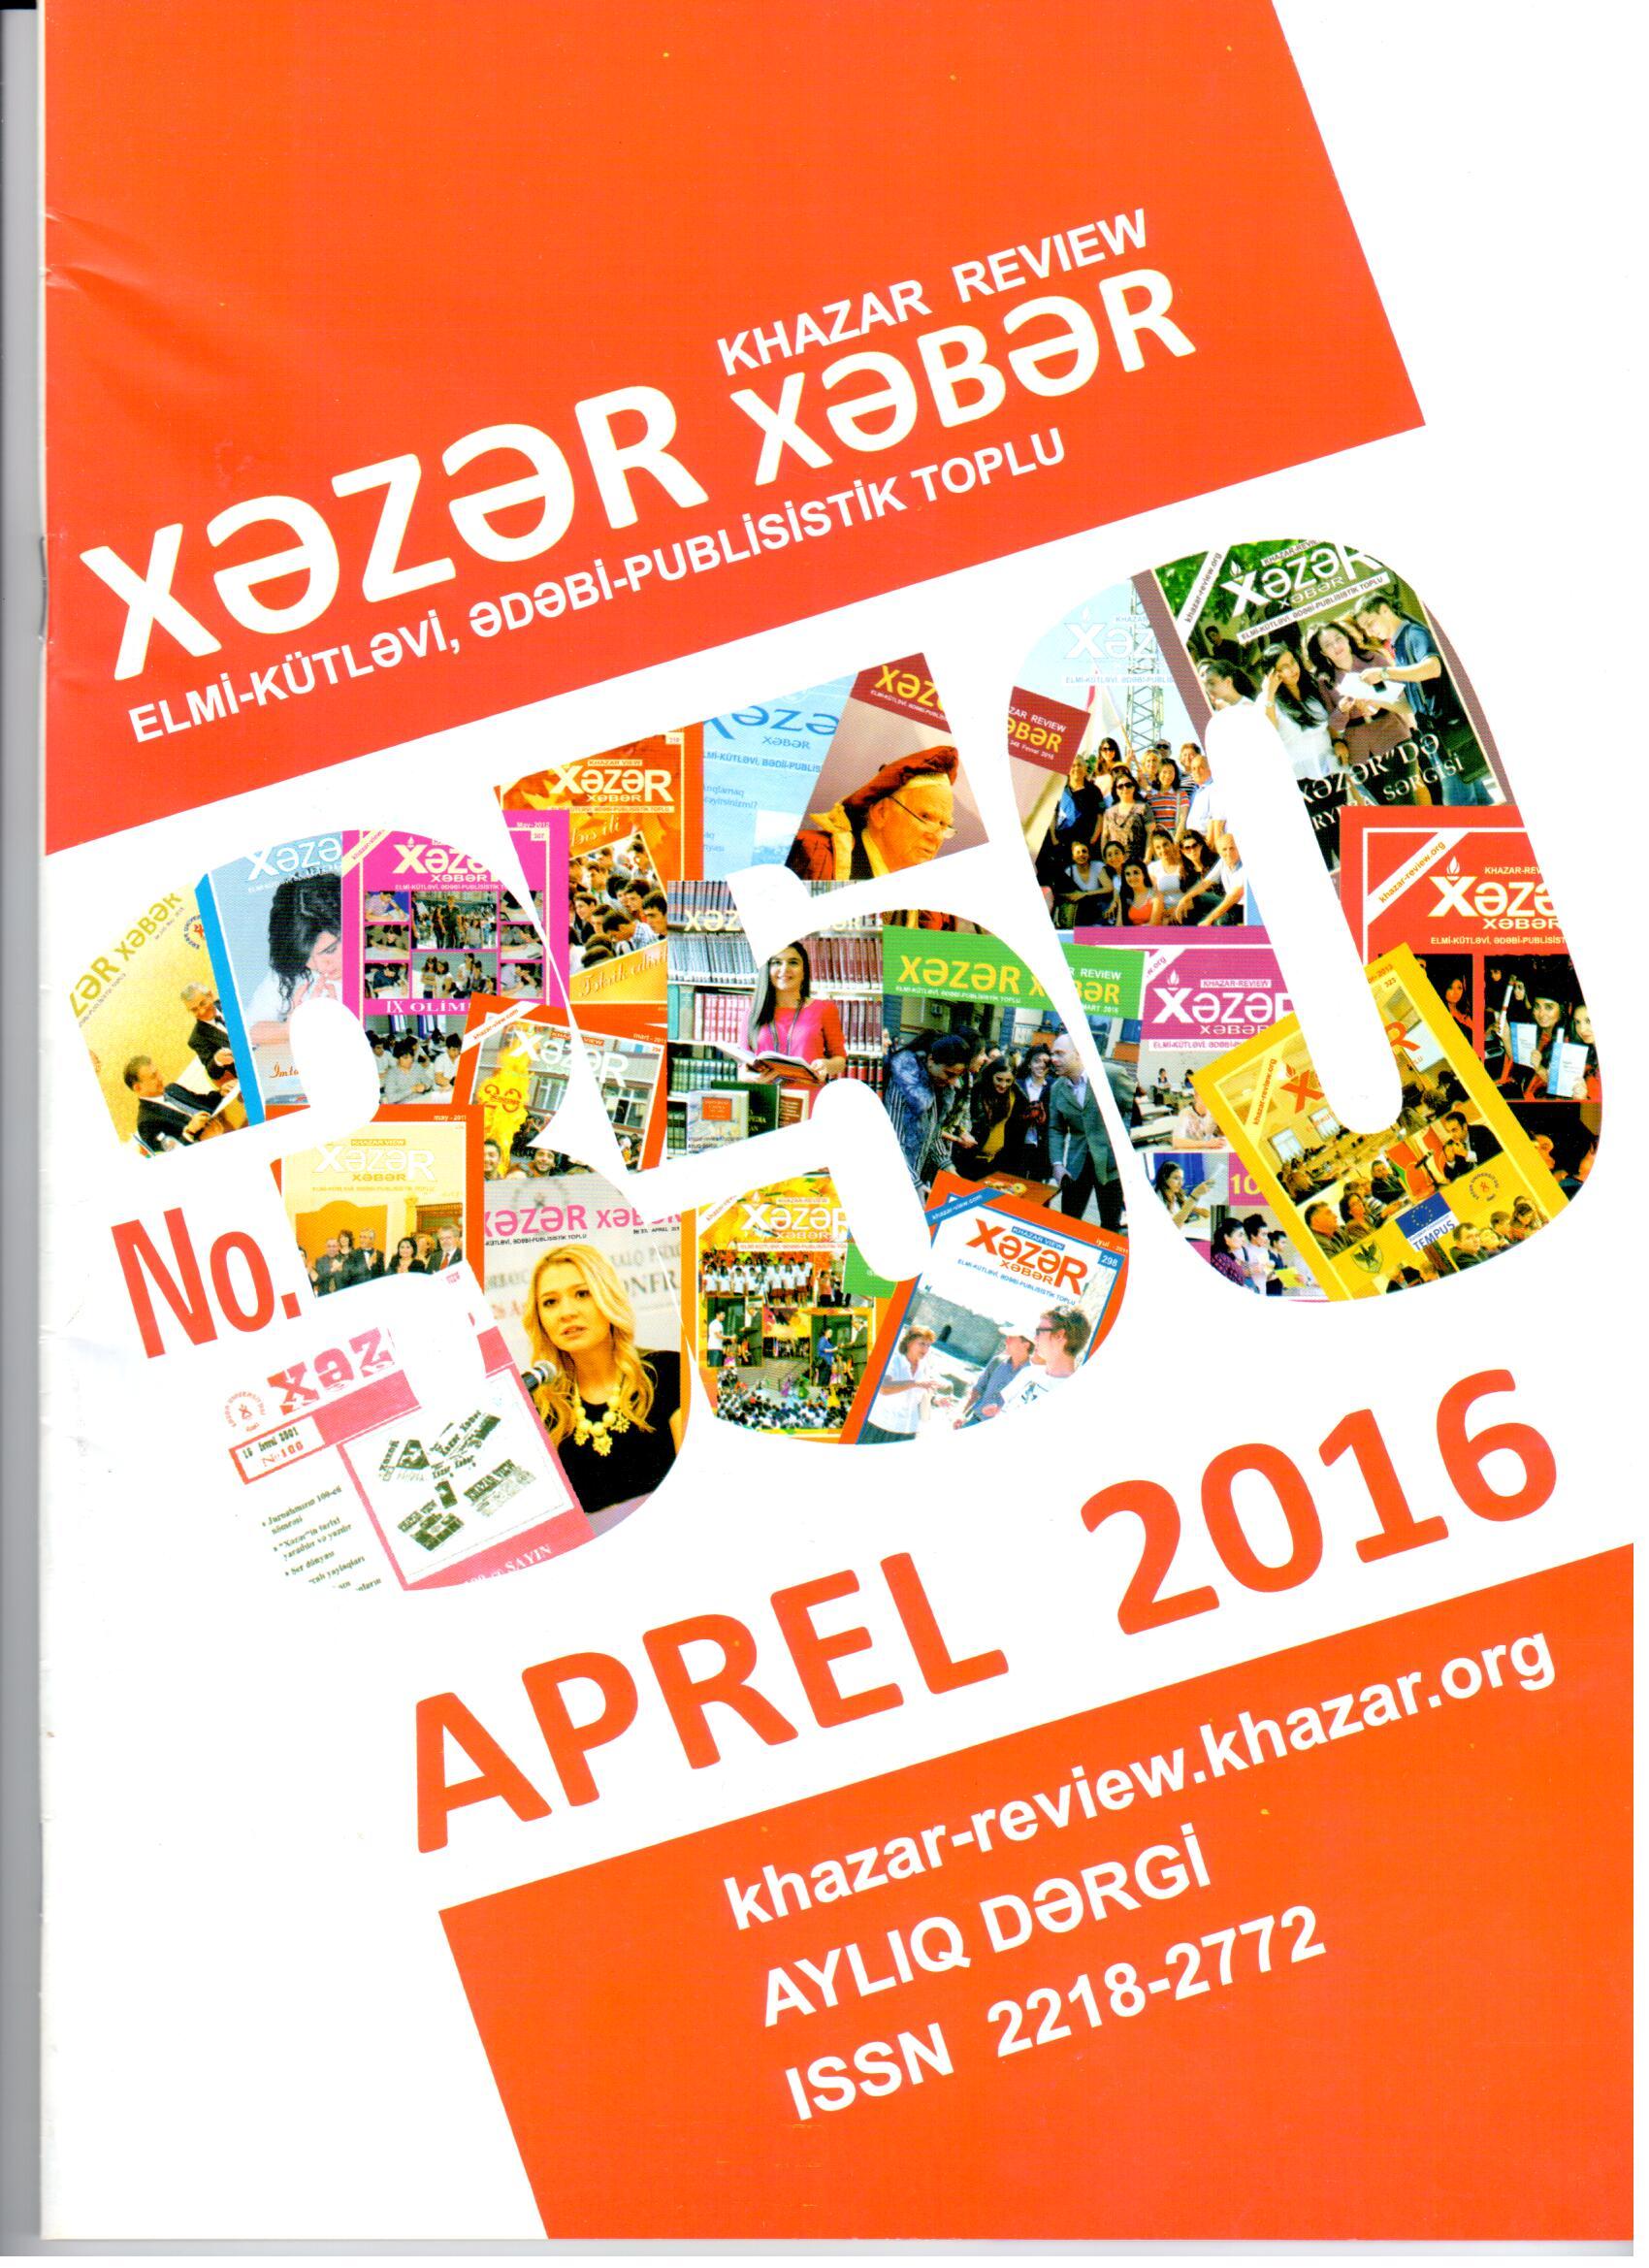 April Issue of Khazar Review Journal Printed